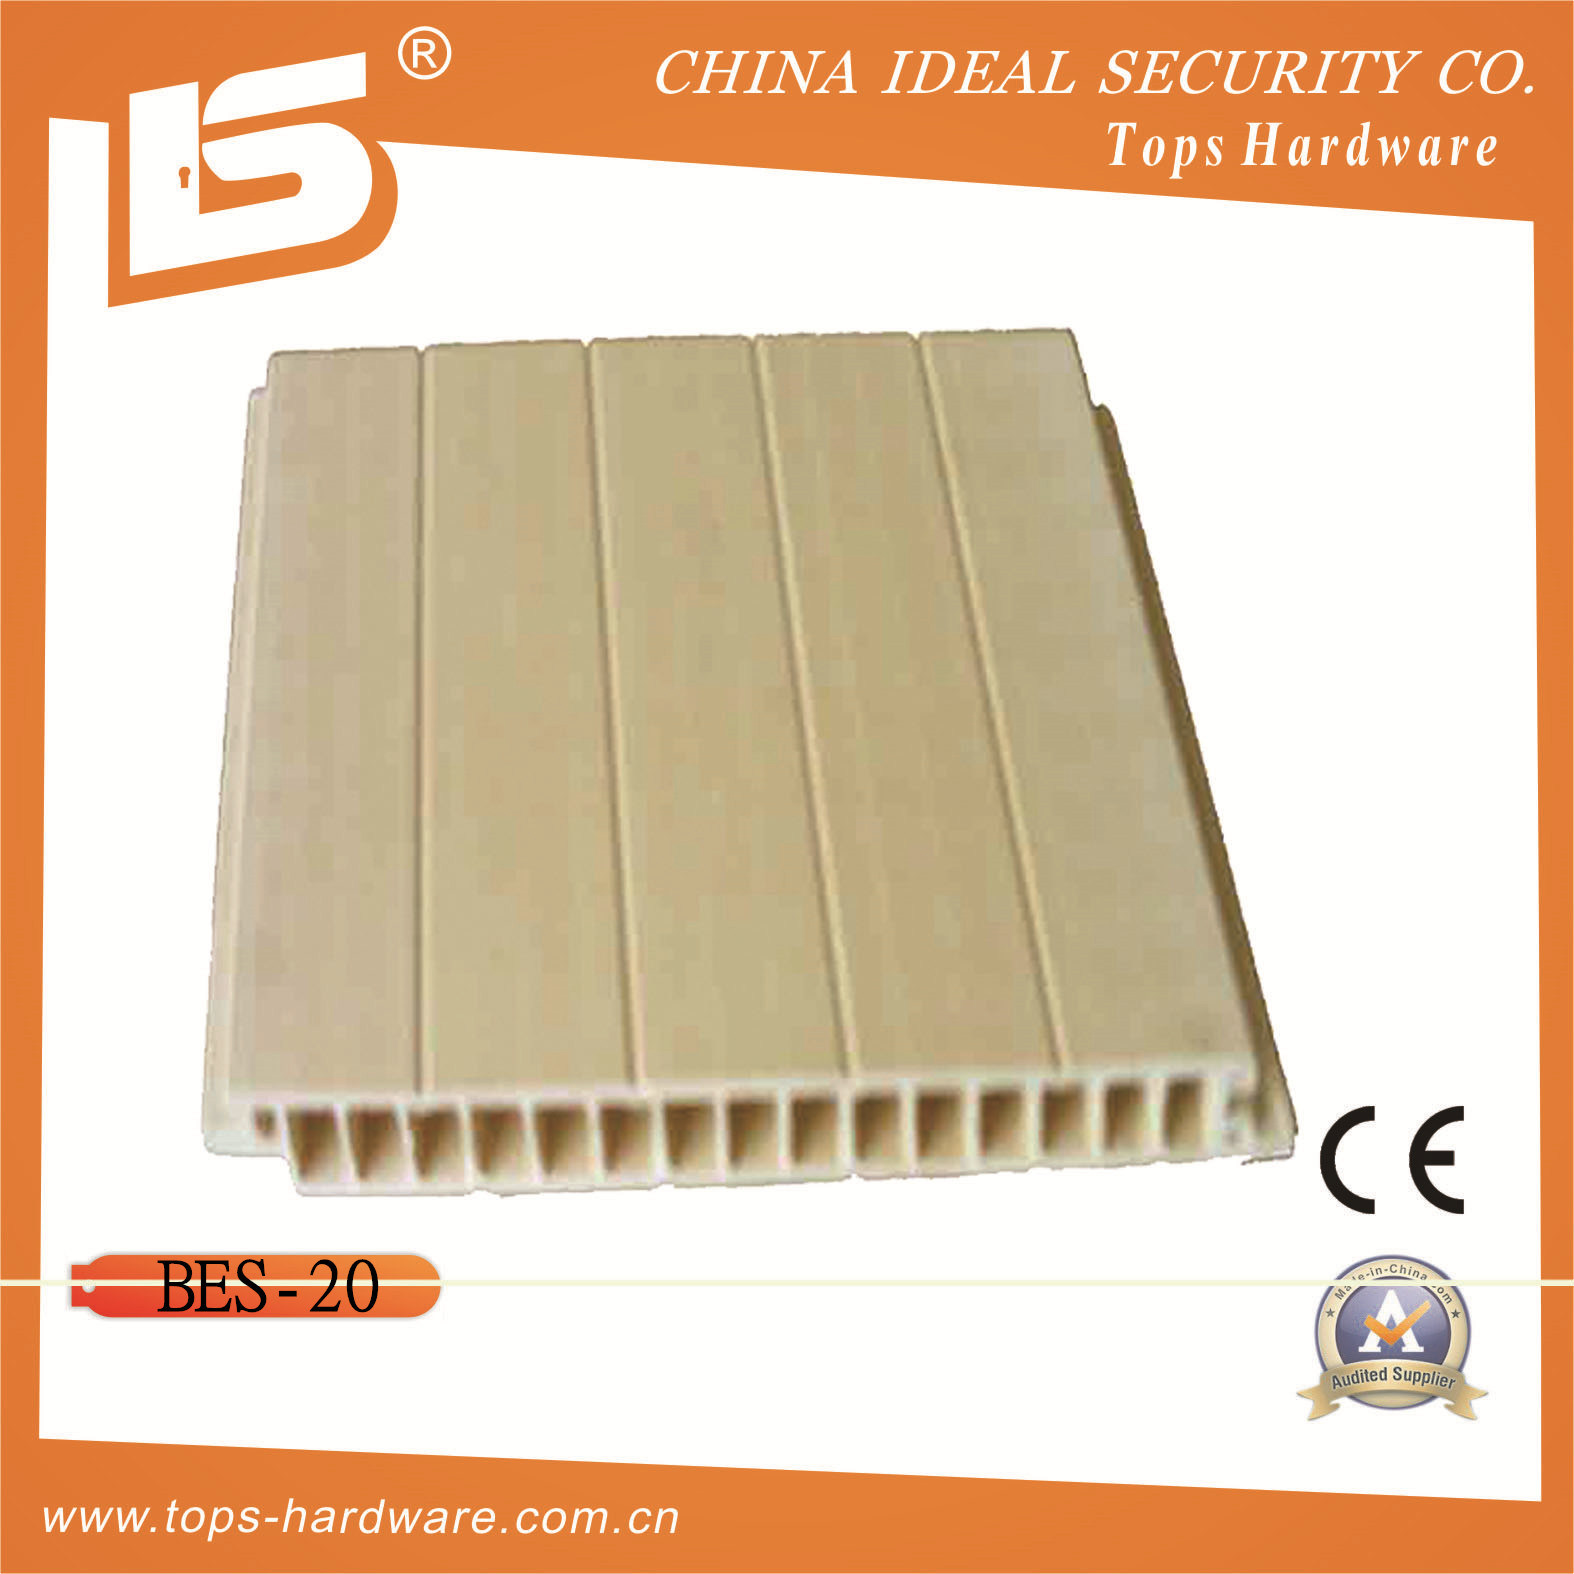 WPC Decorative Wall Panel Bes-20